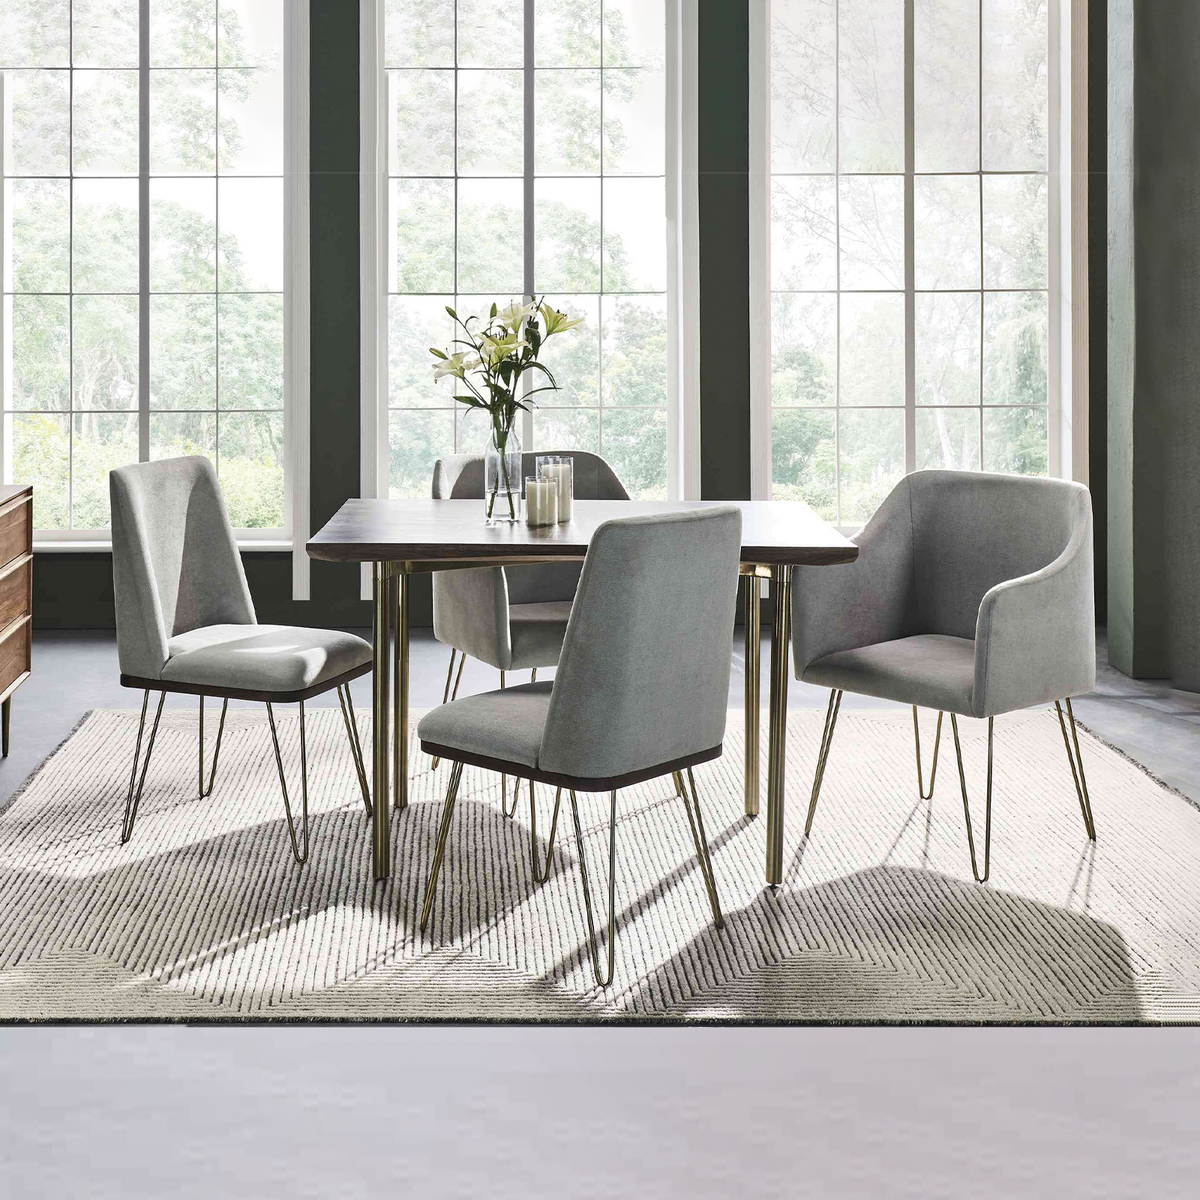 Barcelona Dining Table With 2 Without Arm and 2 Arms Chairs